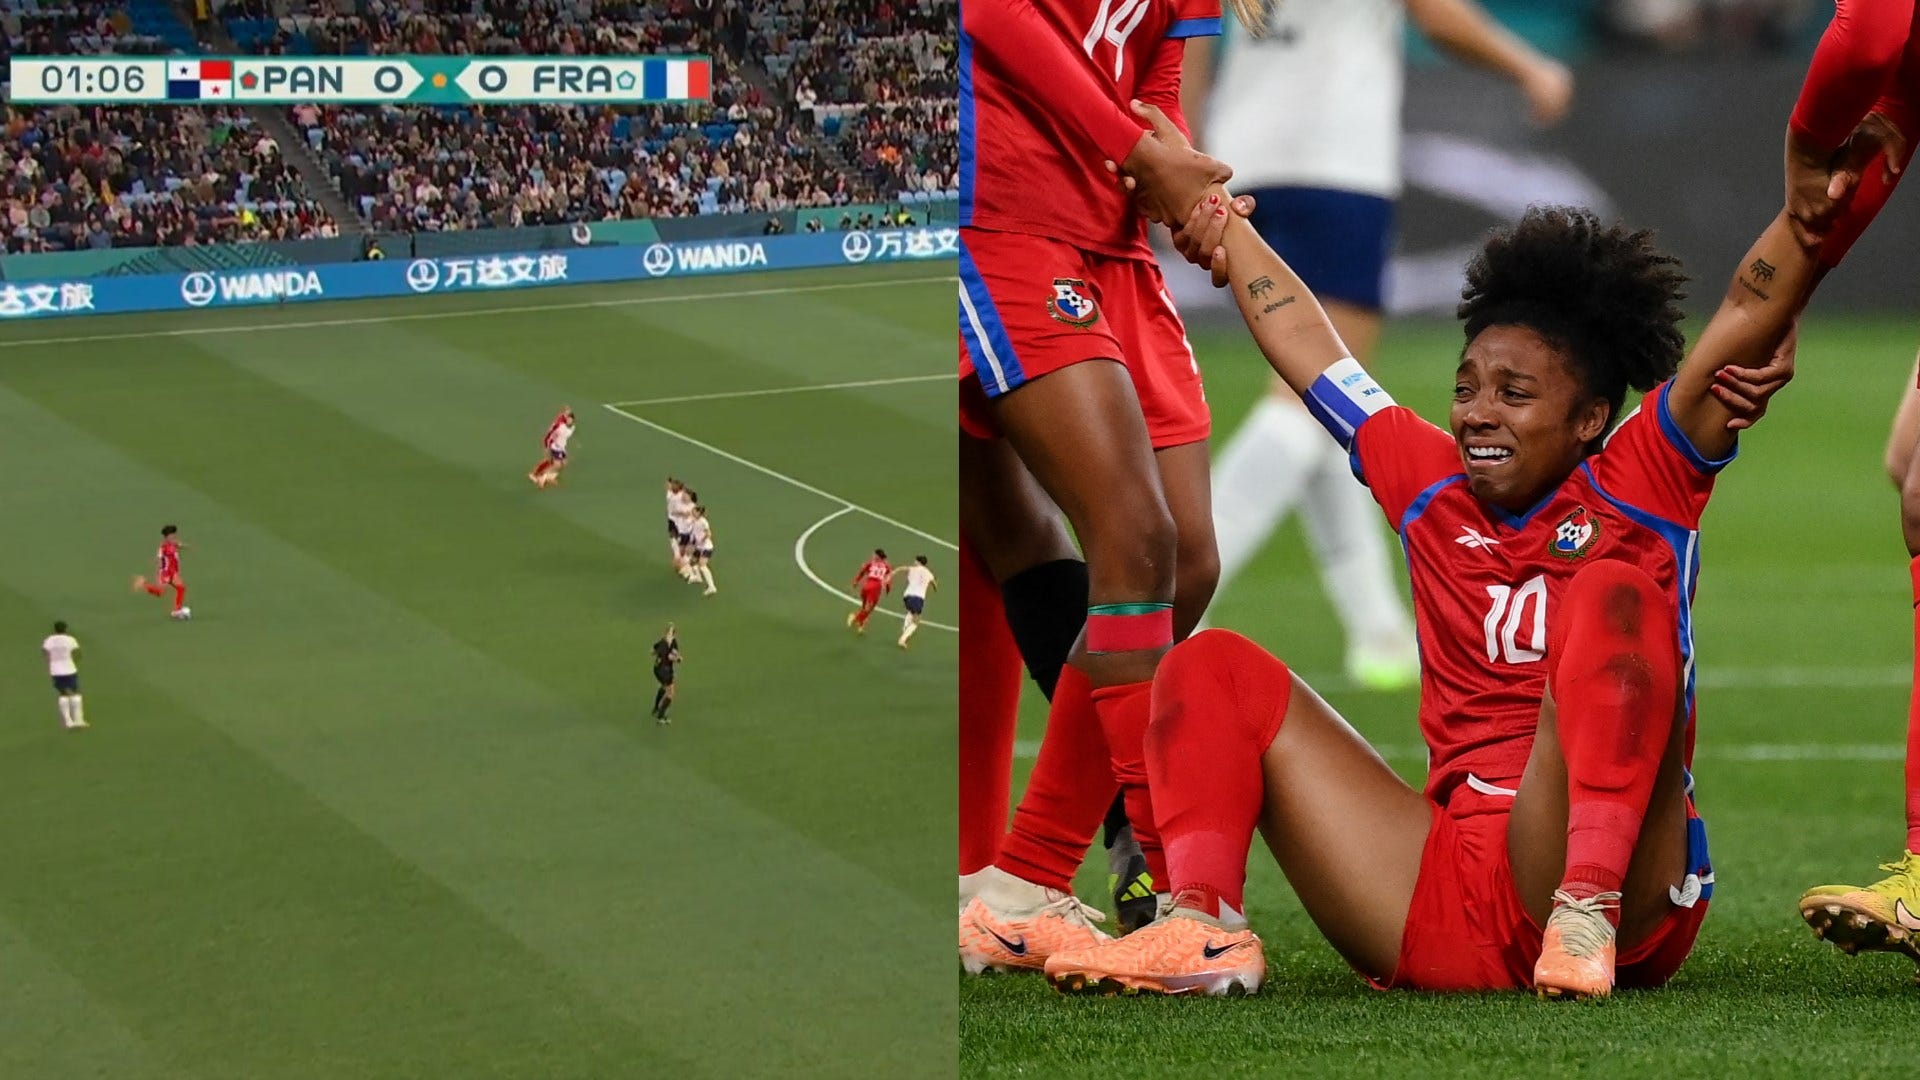 WATCH History made! Marta Cox in tears after scoring goal of the tournament contender for Panama at Womens World Cup as incredible 35-yard free-kick arrows into top corner to stun France 